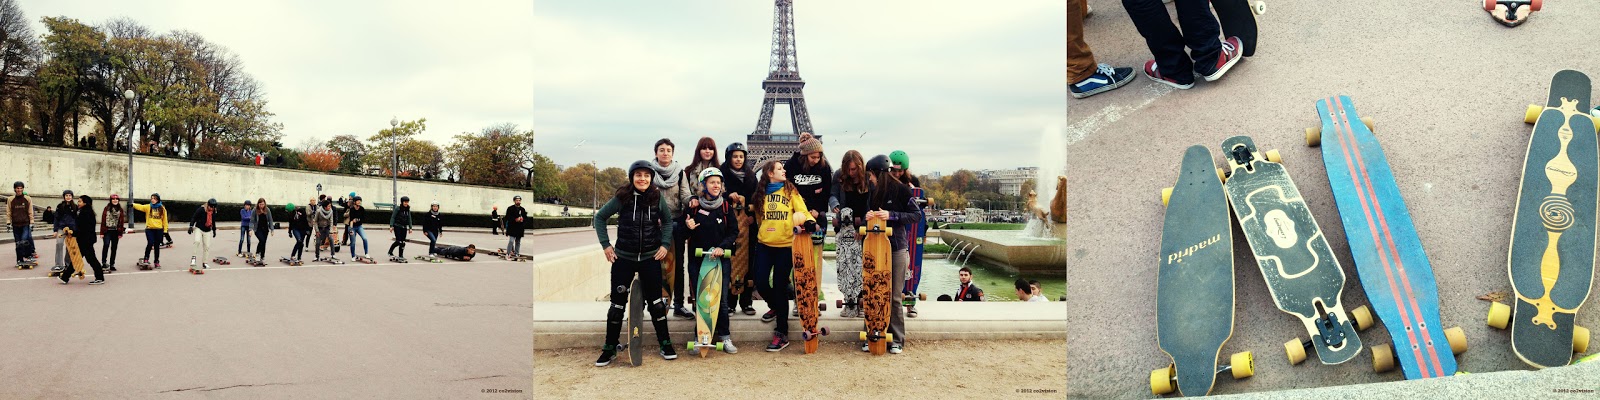 Les Planches Roulettes INITIATION LONGBOARD GIRLS CREW FRANCE 2012